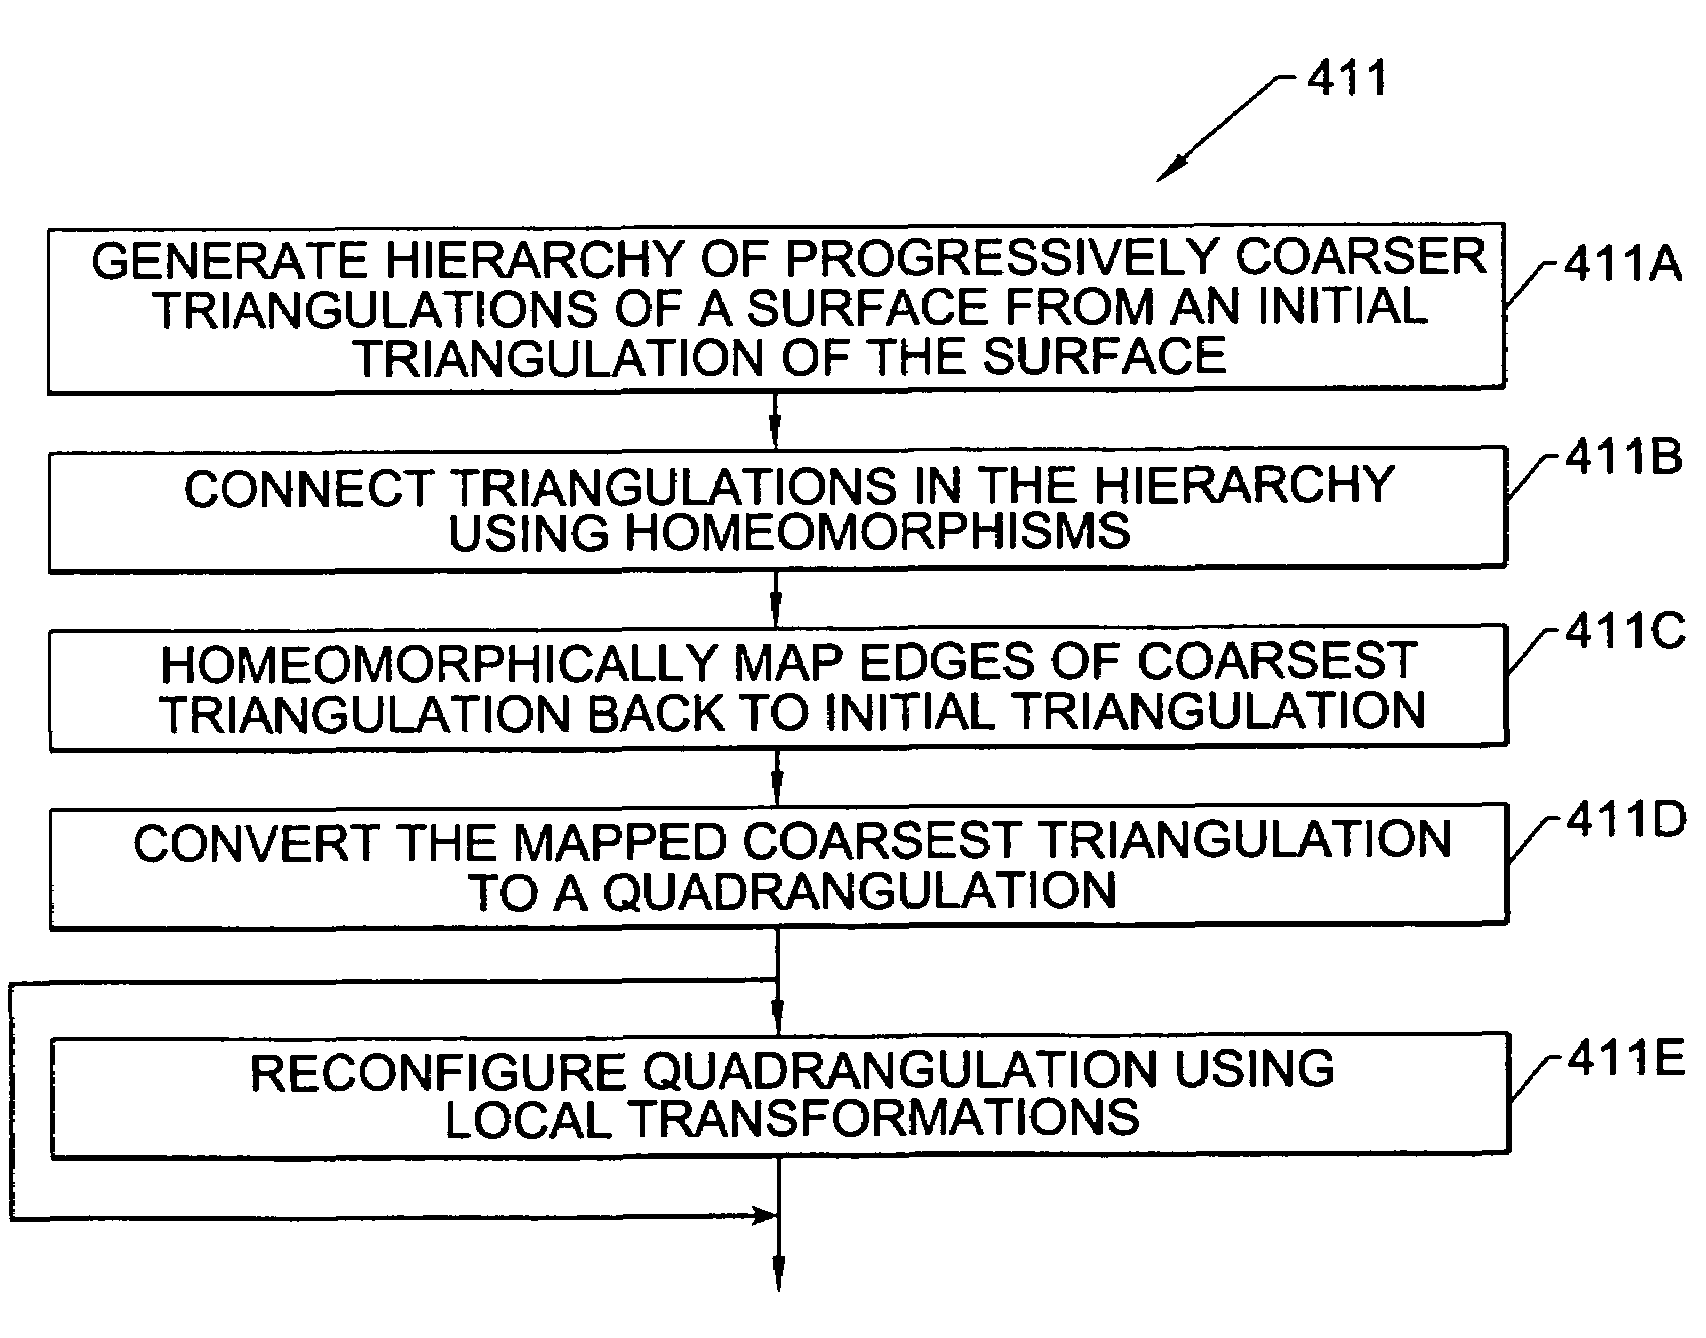 Methods, apparatus and computer program products for automatically generating nurbs models of triangulated surfaces using homeomorphisms